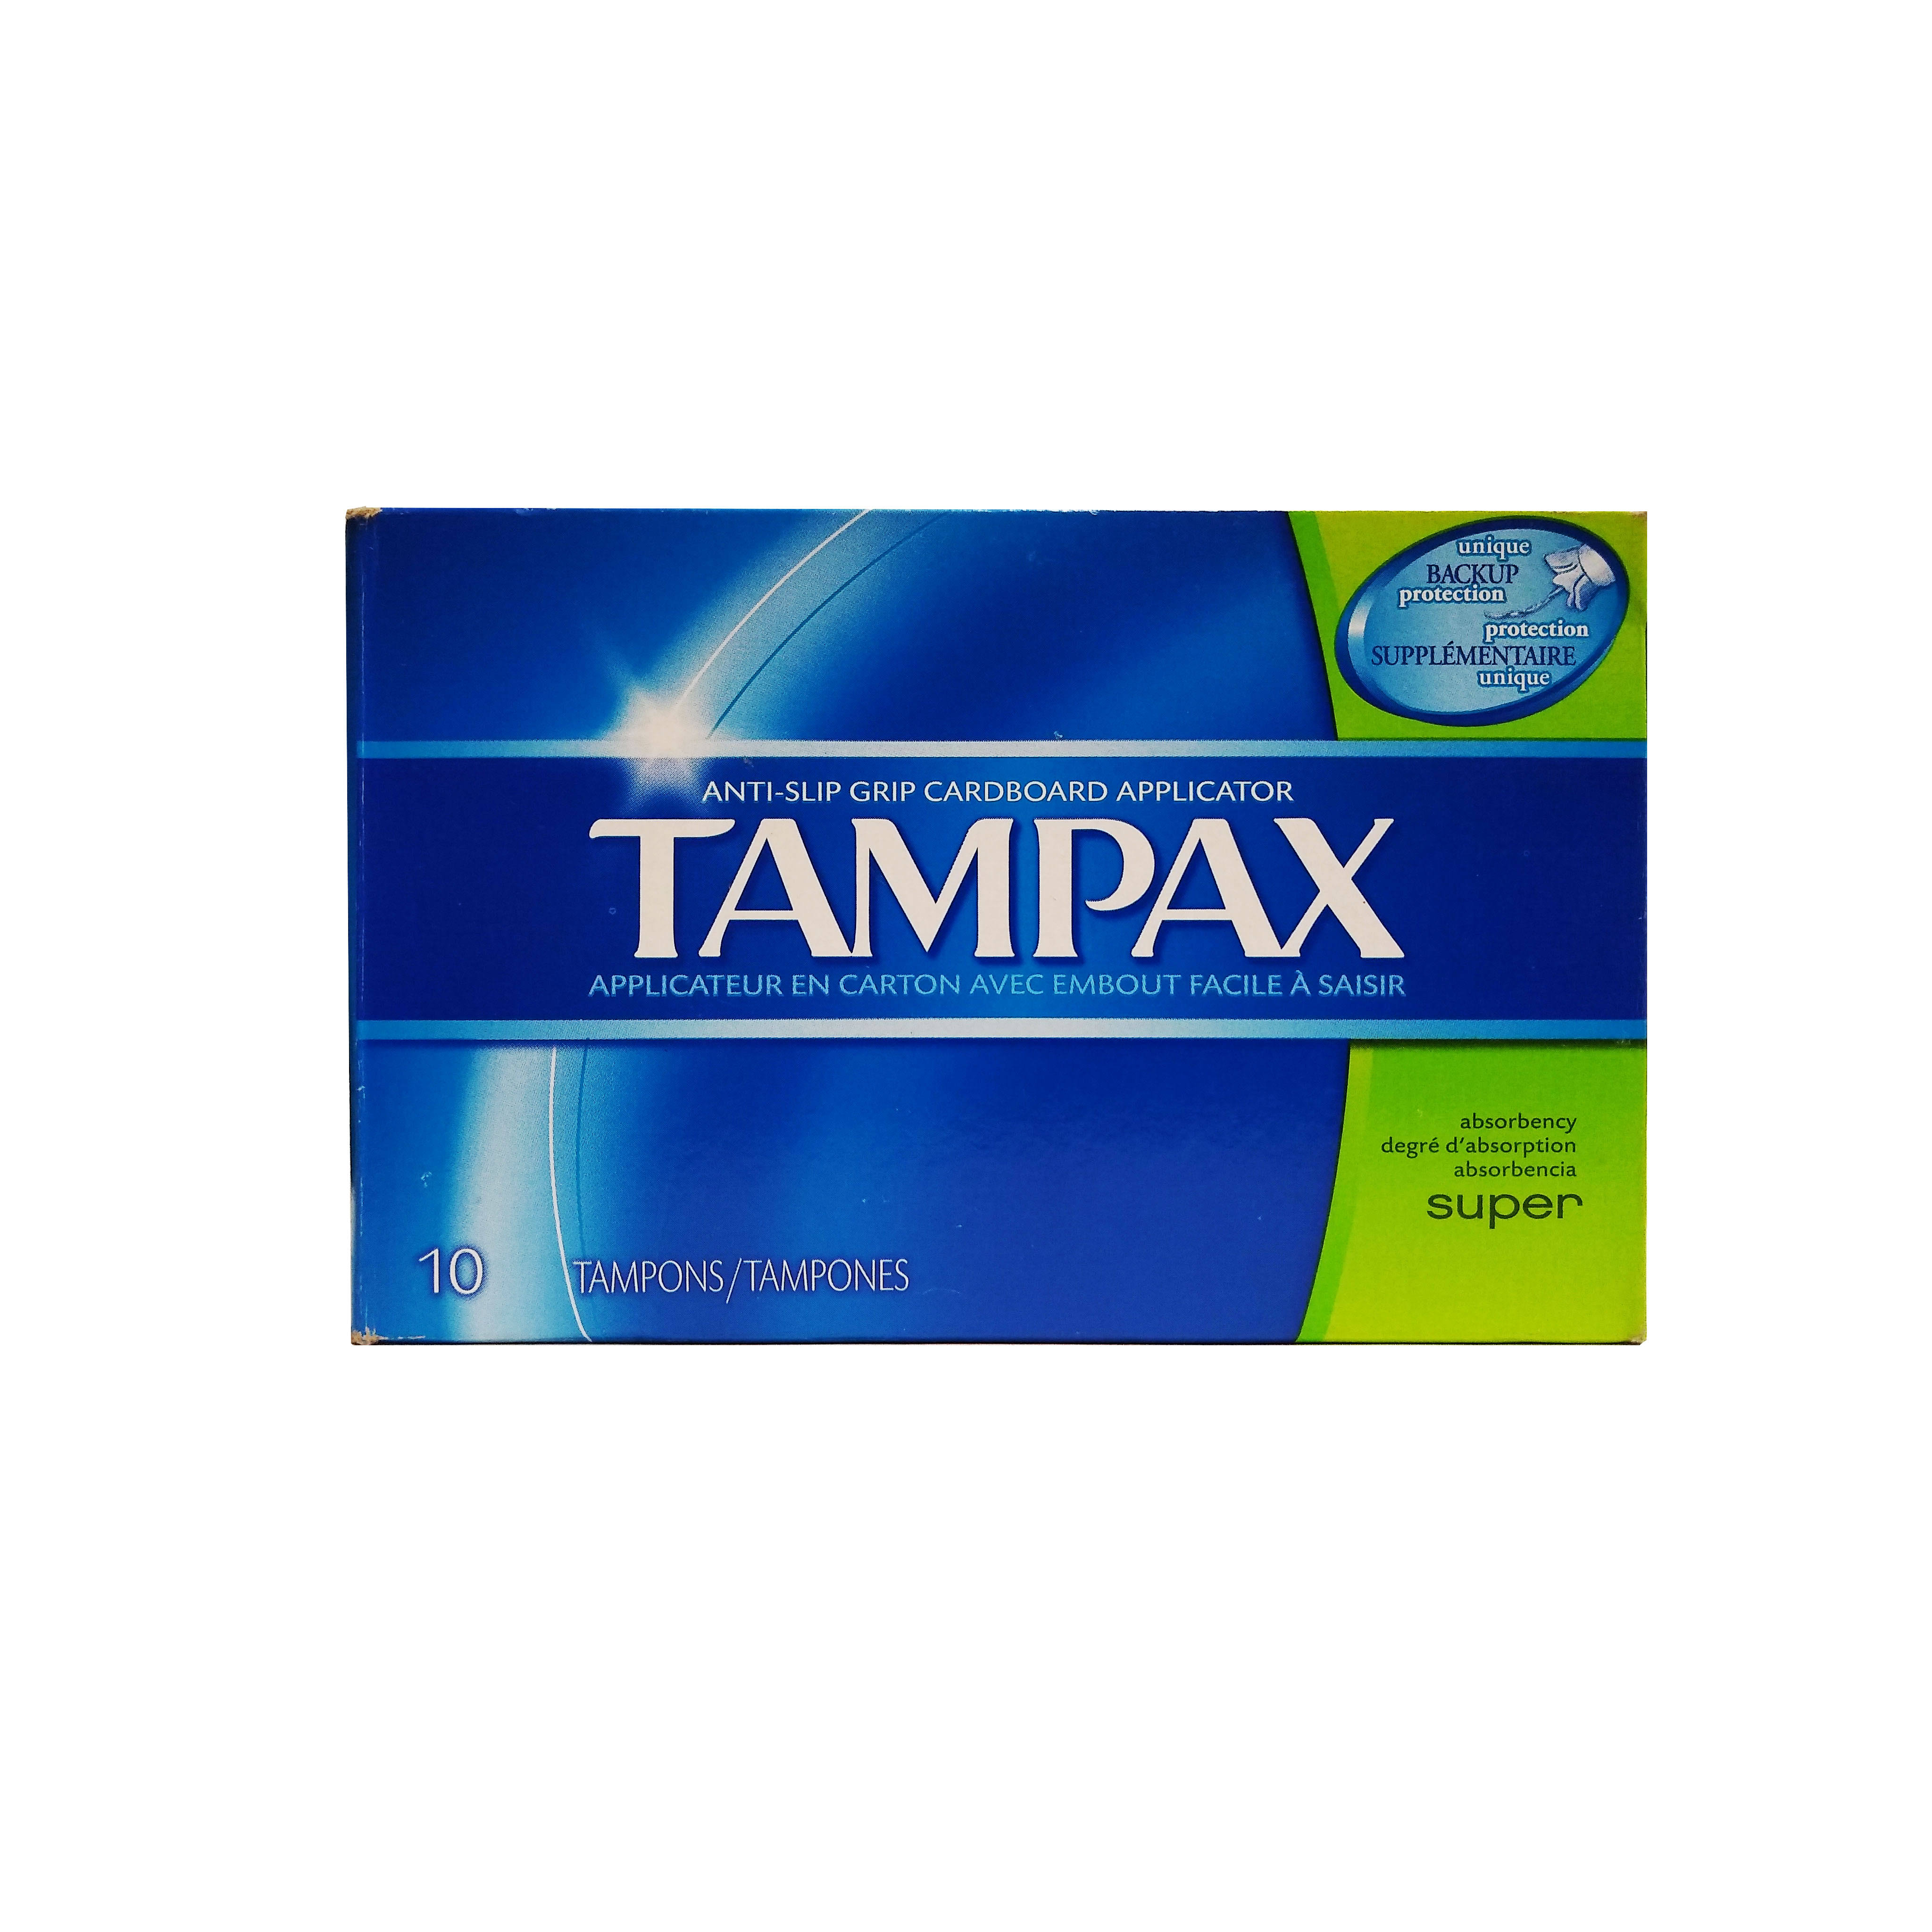 Tampax Tampons Super 10 Each